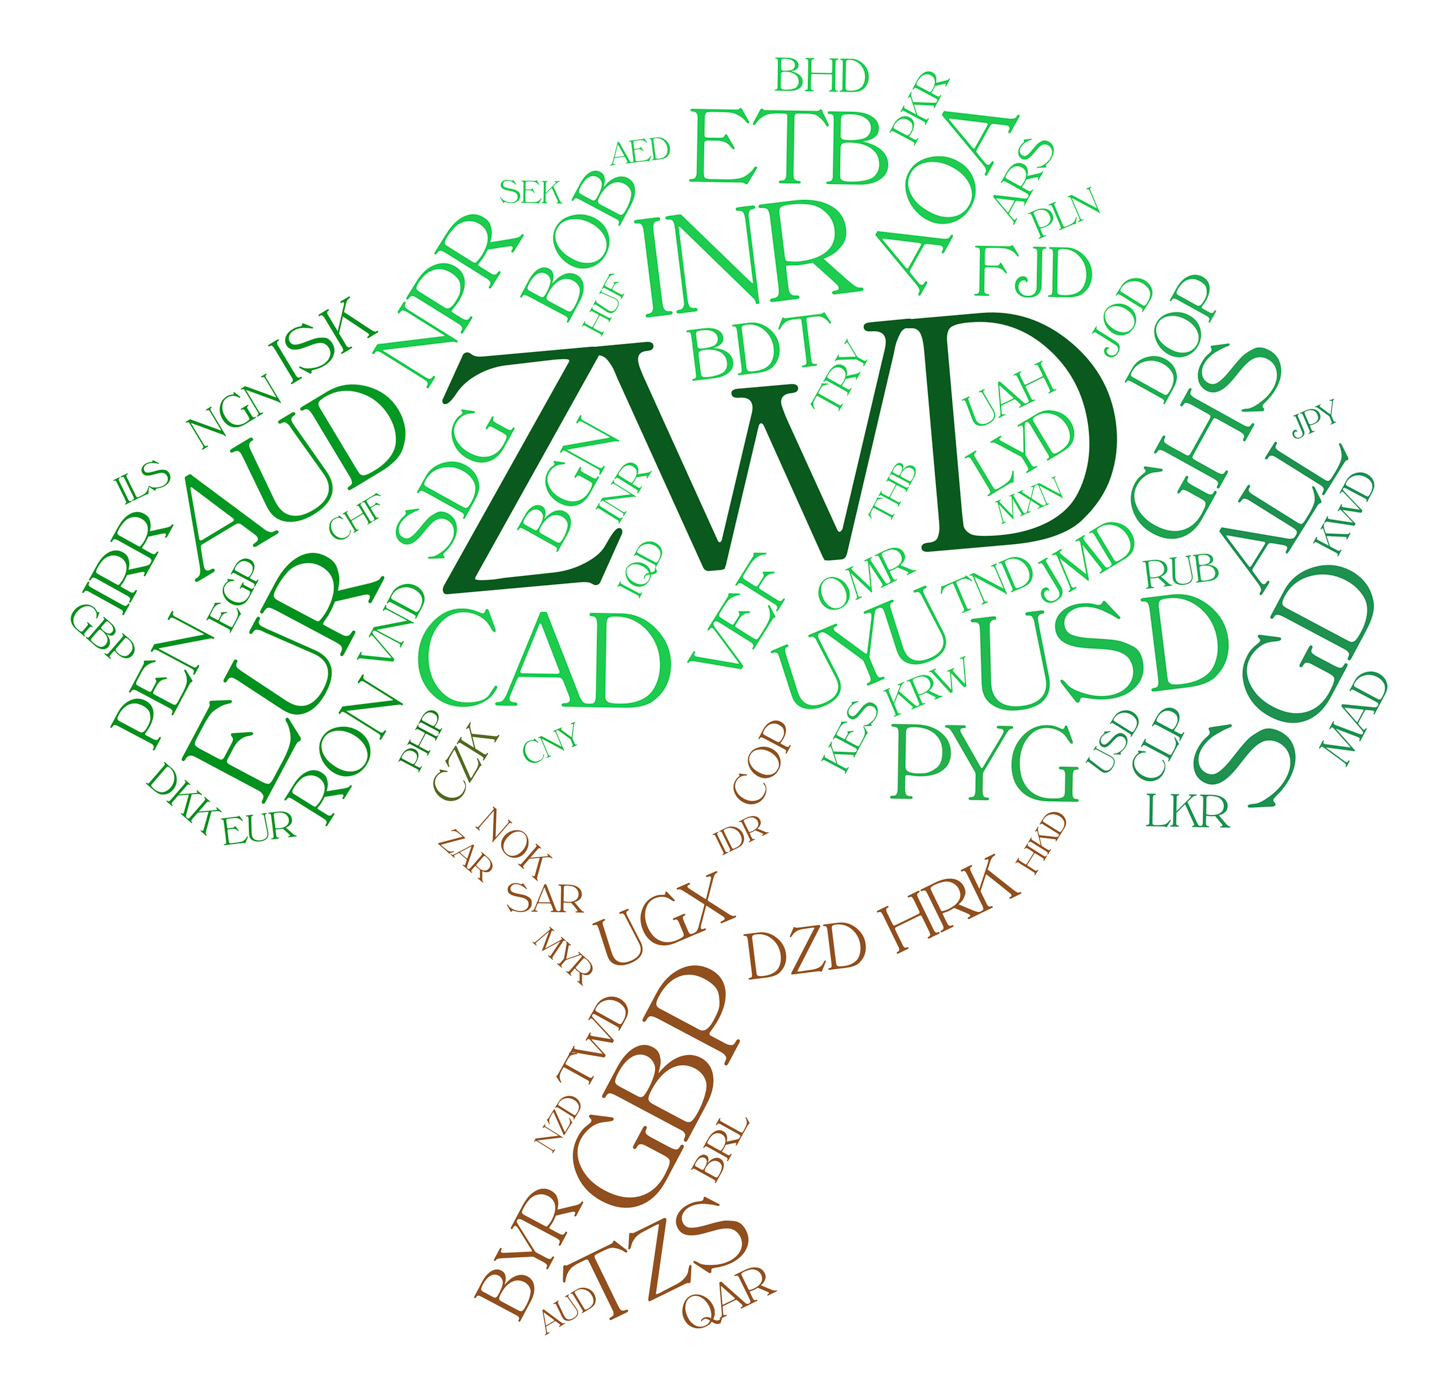 Zwd currency means zimbabwe dollars and coinage photo